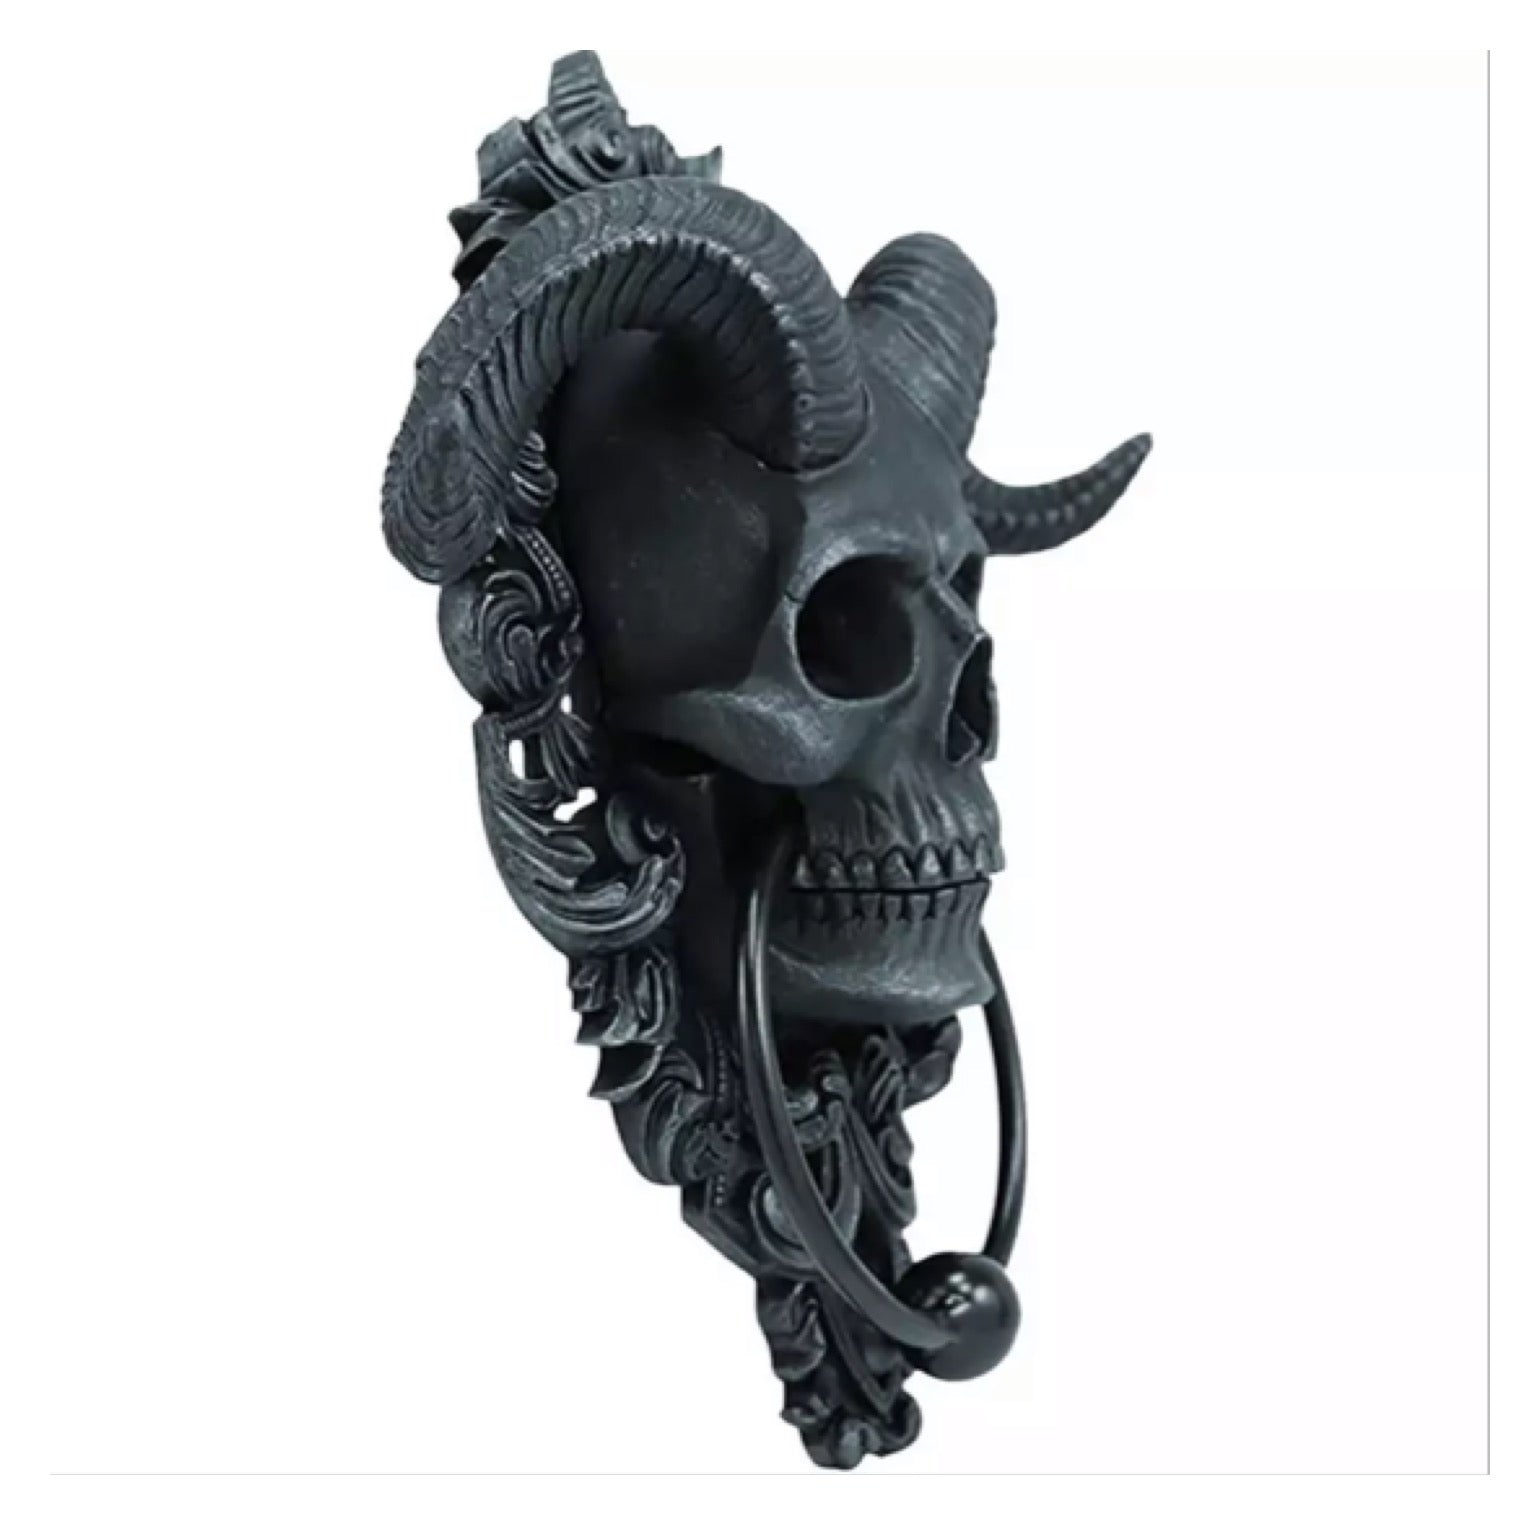 Door Knocker Skull Horns Gothic Small - The Renmy Store Homewares & Gifts 